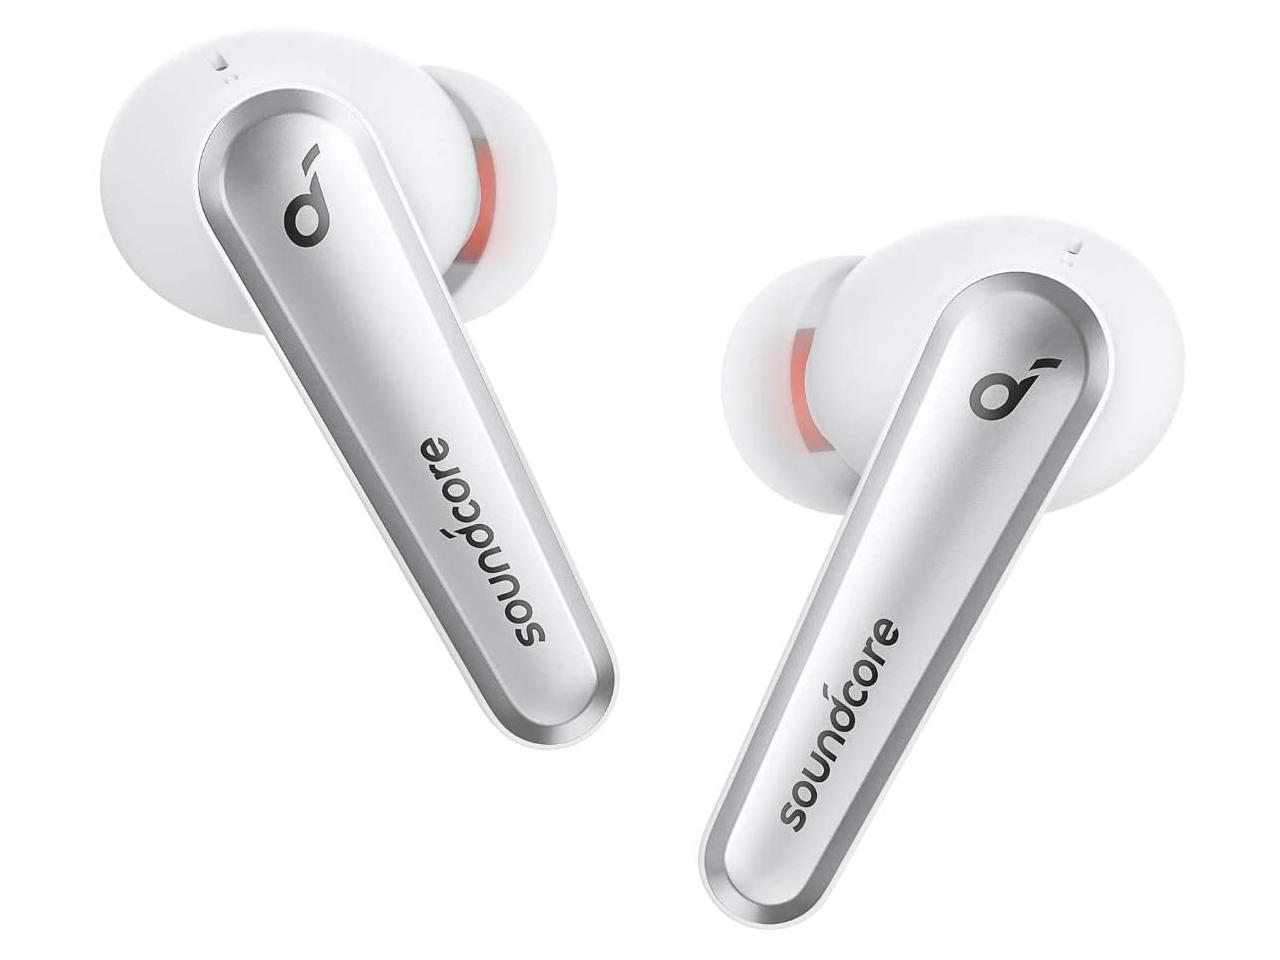 Anker Soundcore Liberty Air 2 Pro ANC Earbuds *RFB* (Blk | White) $50